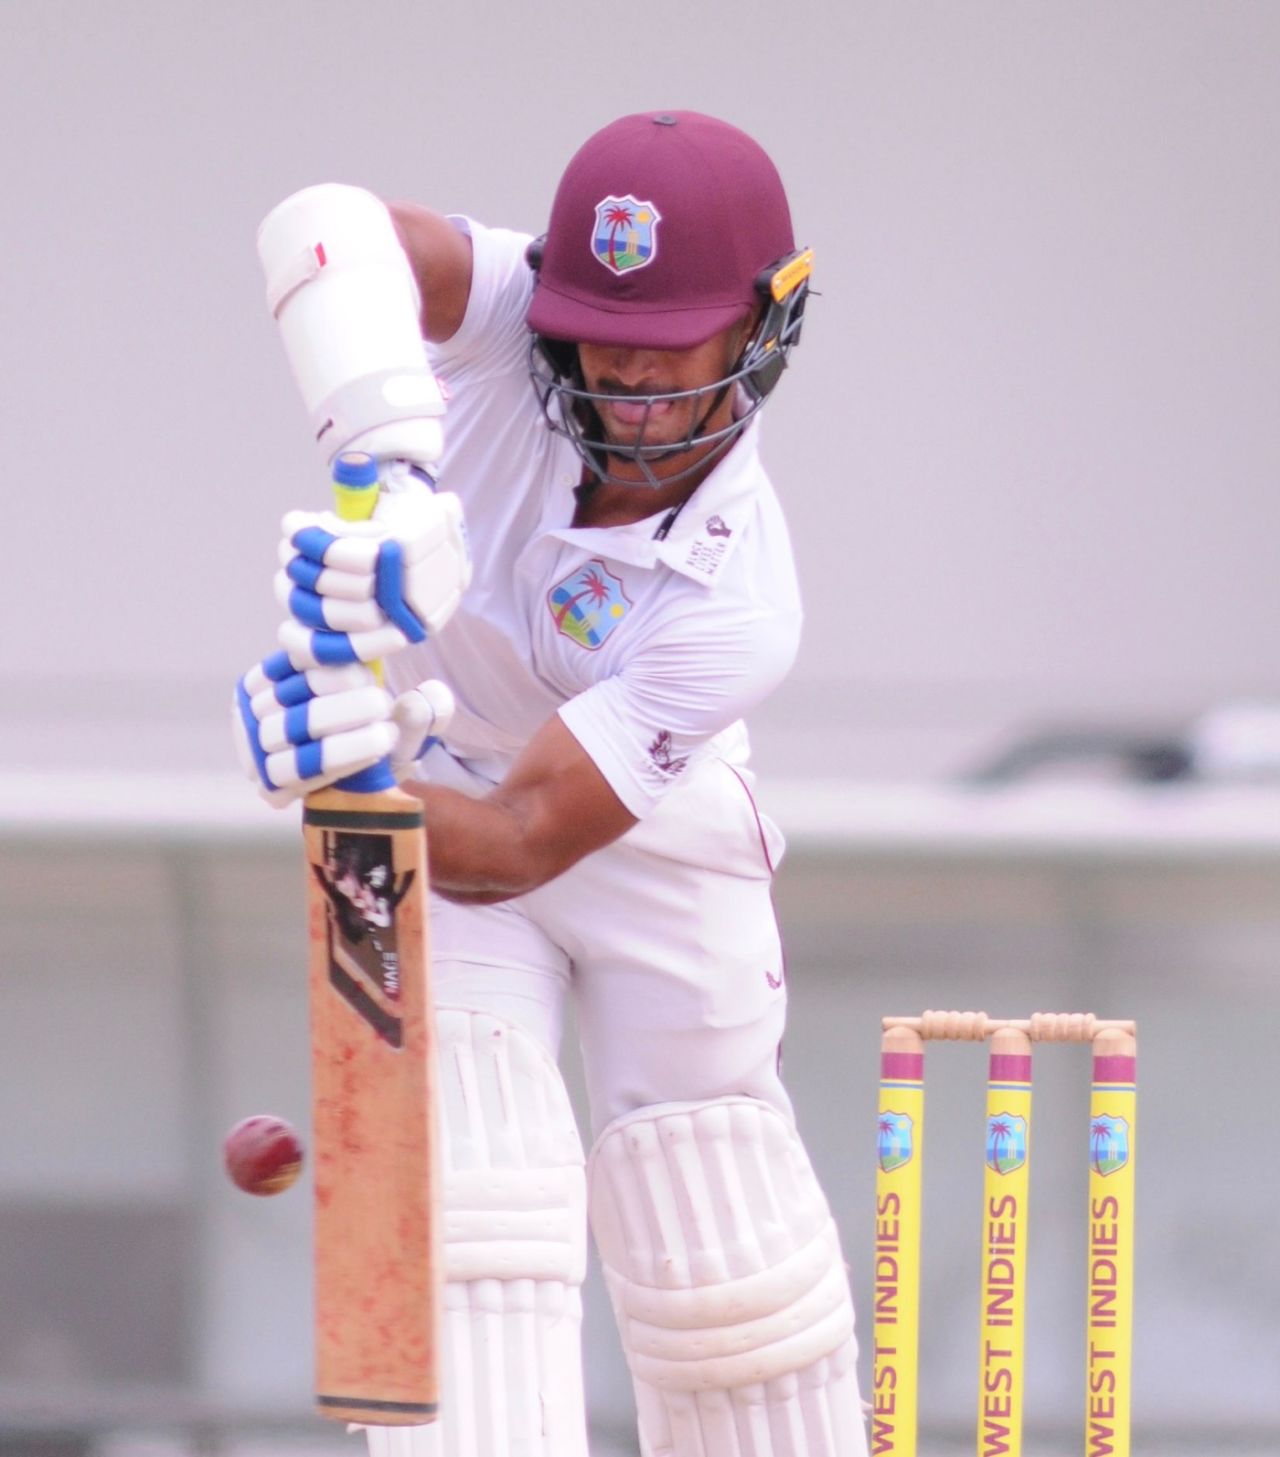 Tagenarine Chanderpaul defends, West Indies A vs Bangladesh A, 2nd unofficial Test, Gros Islet, 3rd day, August 13, 2022